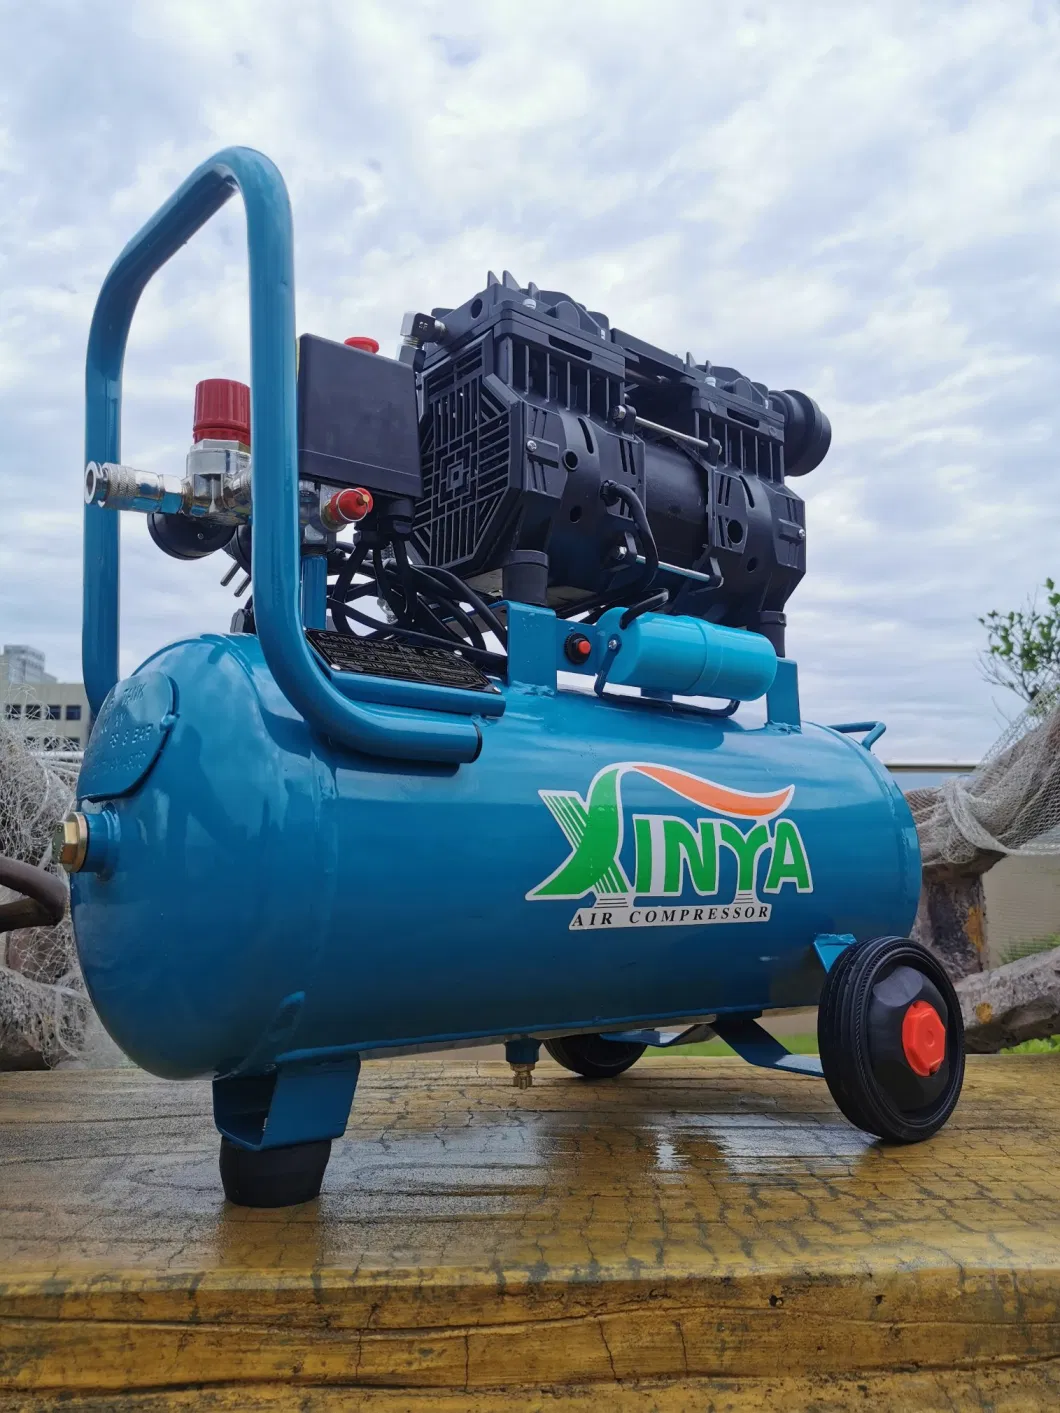 Xinya 2 Poles 4 Poles Oil Free Direct Connected Compressor Manufacturer